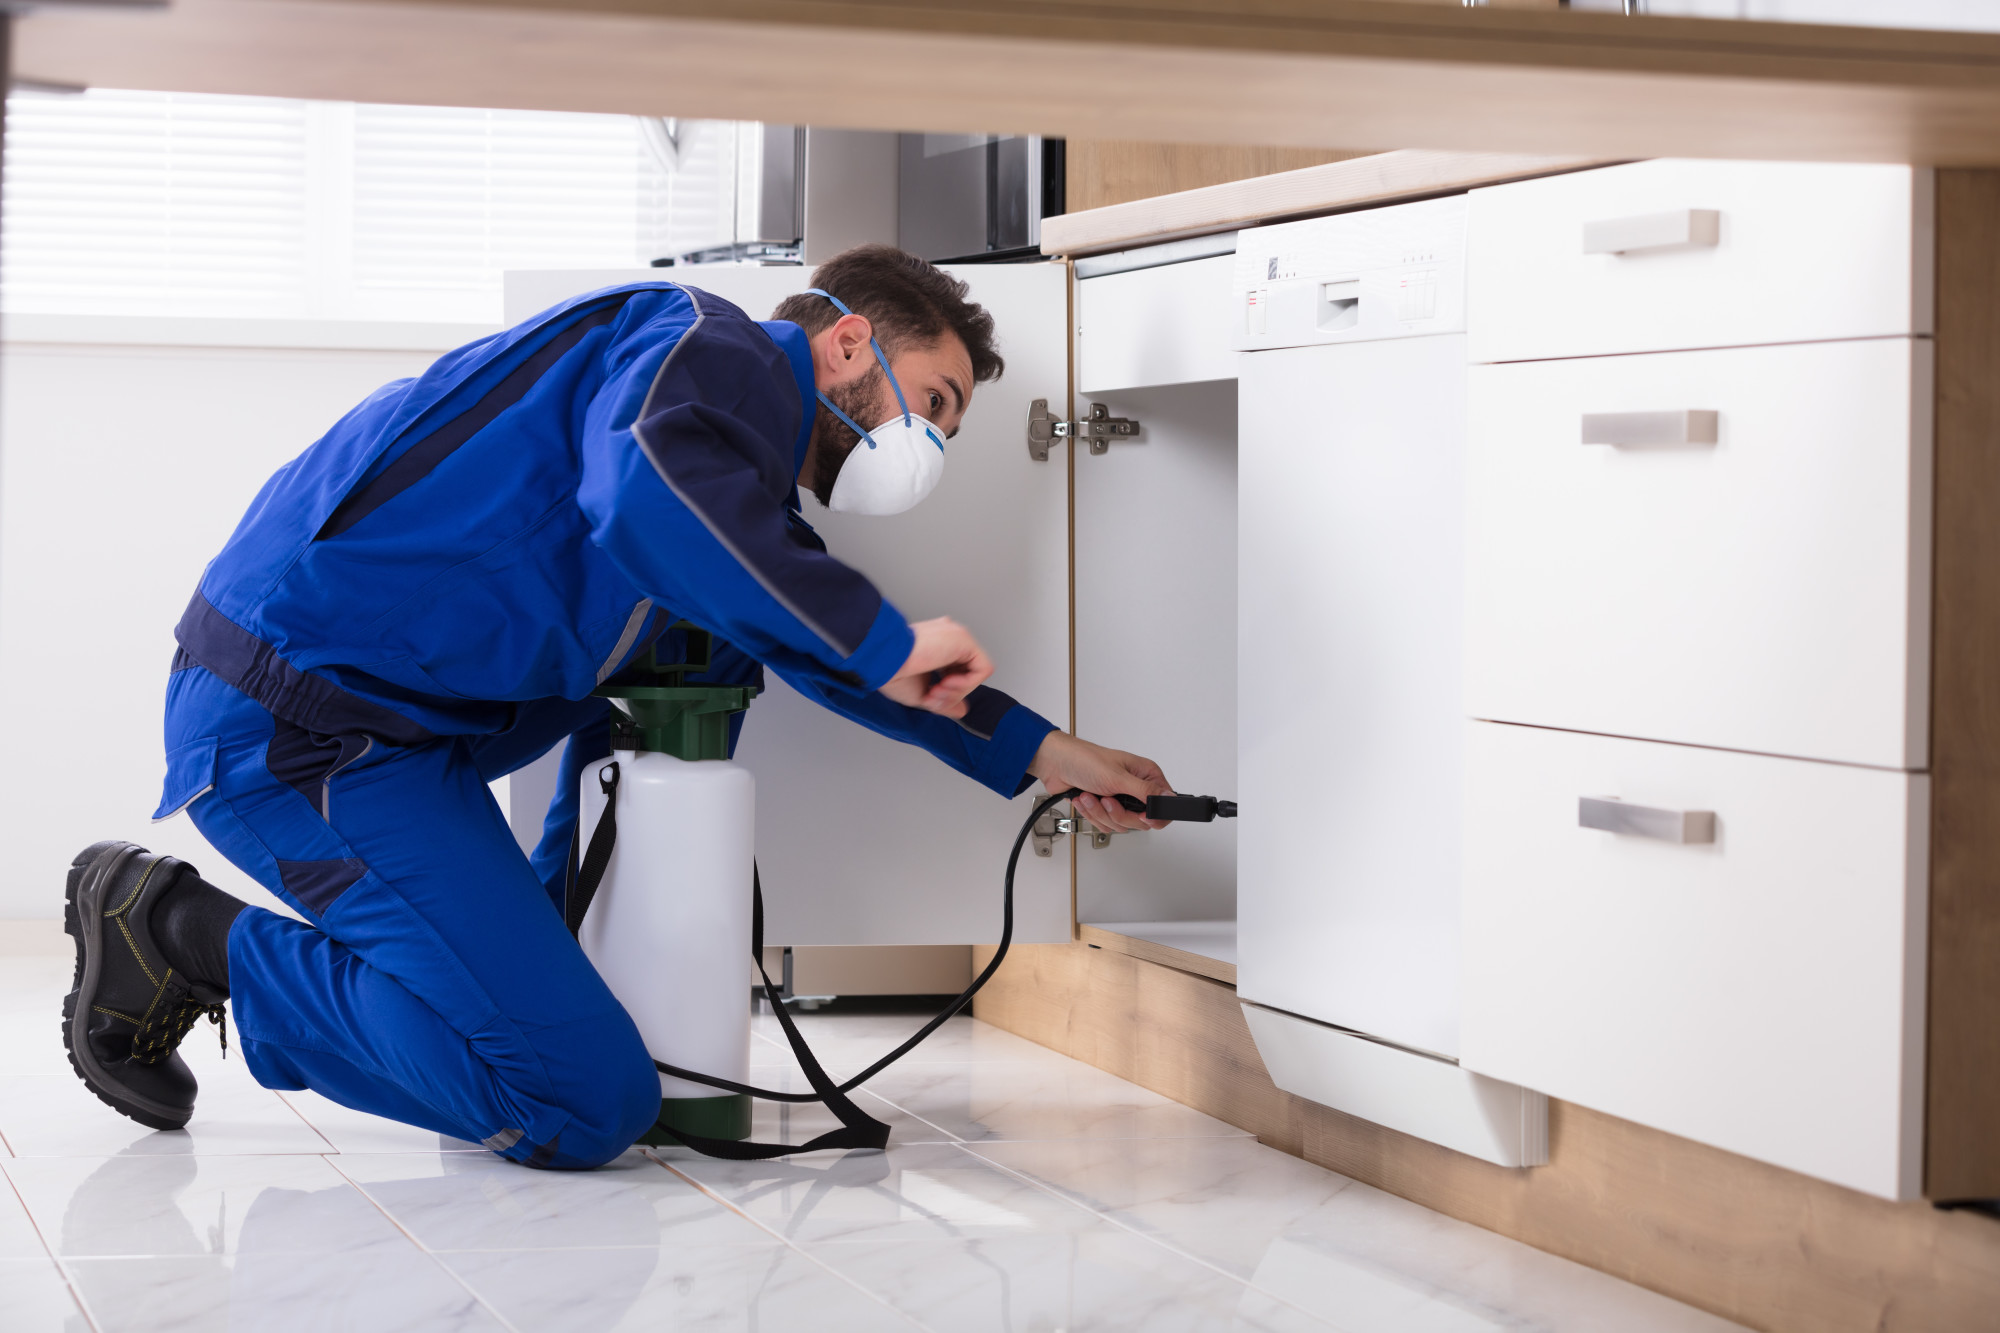 Annual pest control services are essential to keep your home clean and safe. Here's what you need to know about the benefits of pest control services.